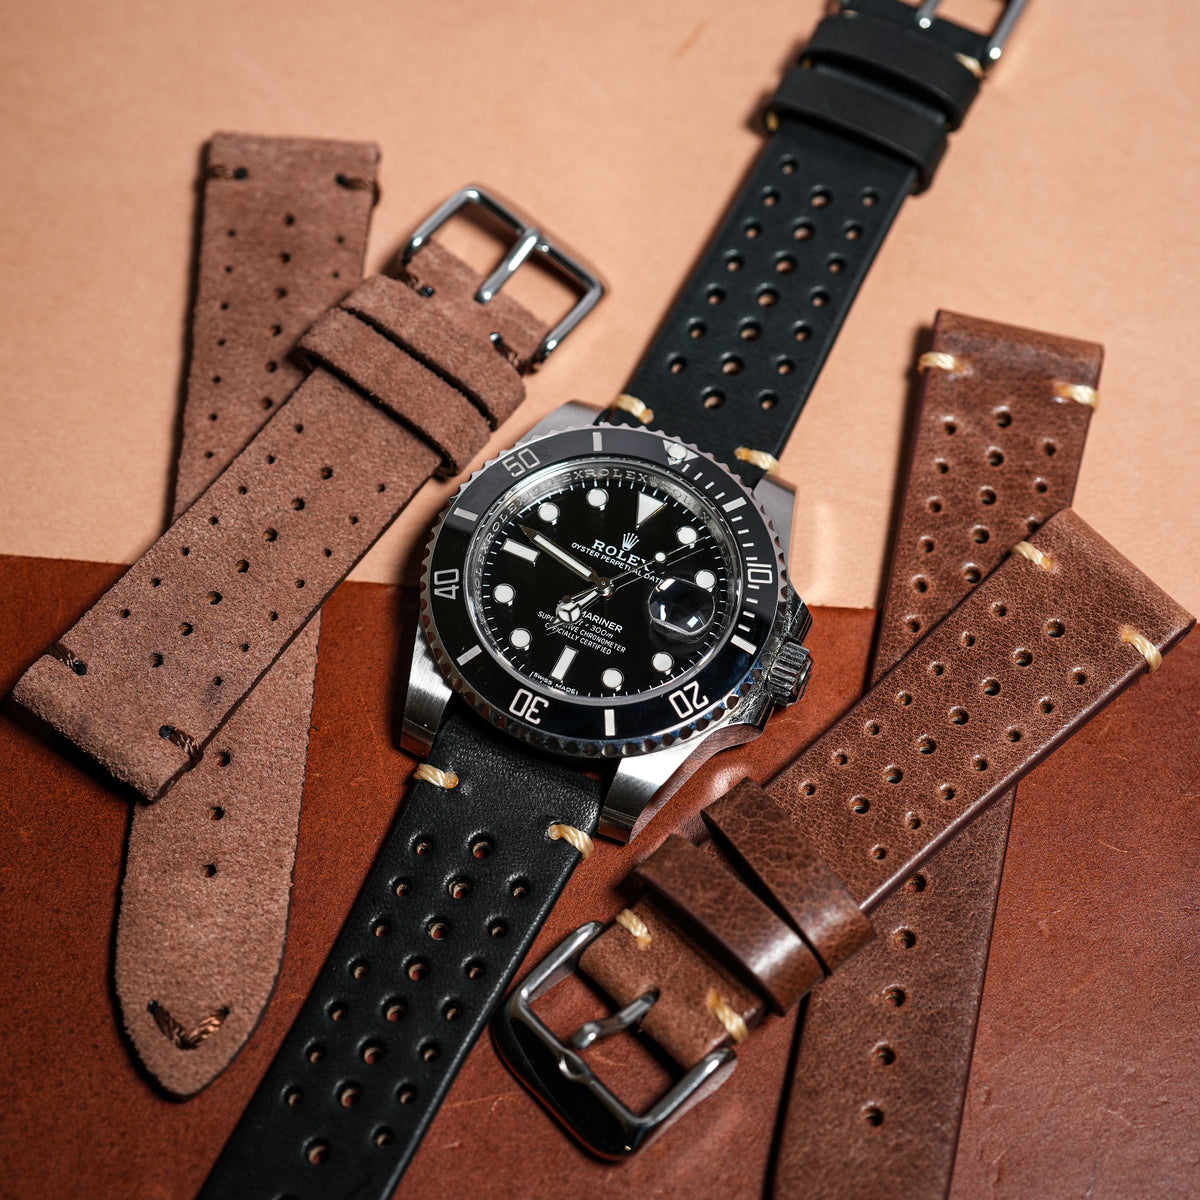 Premium Rally Leather Watch Strap in Black - Nomad Watch Works SG